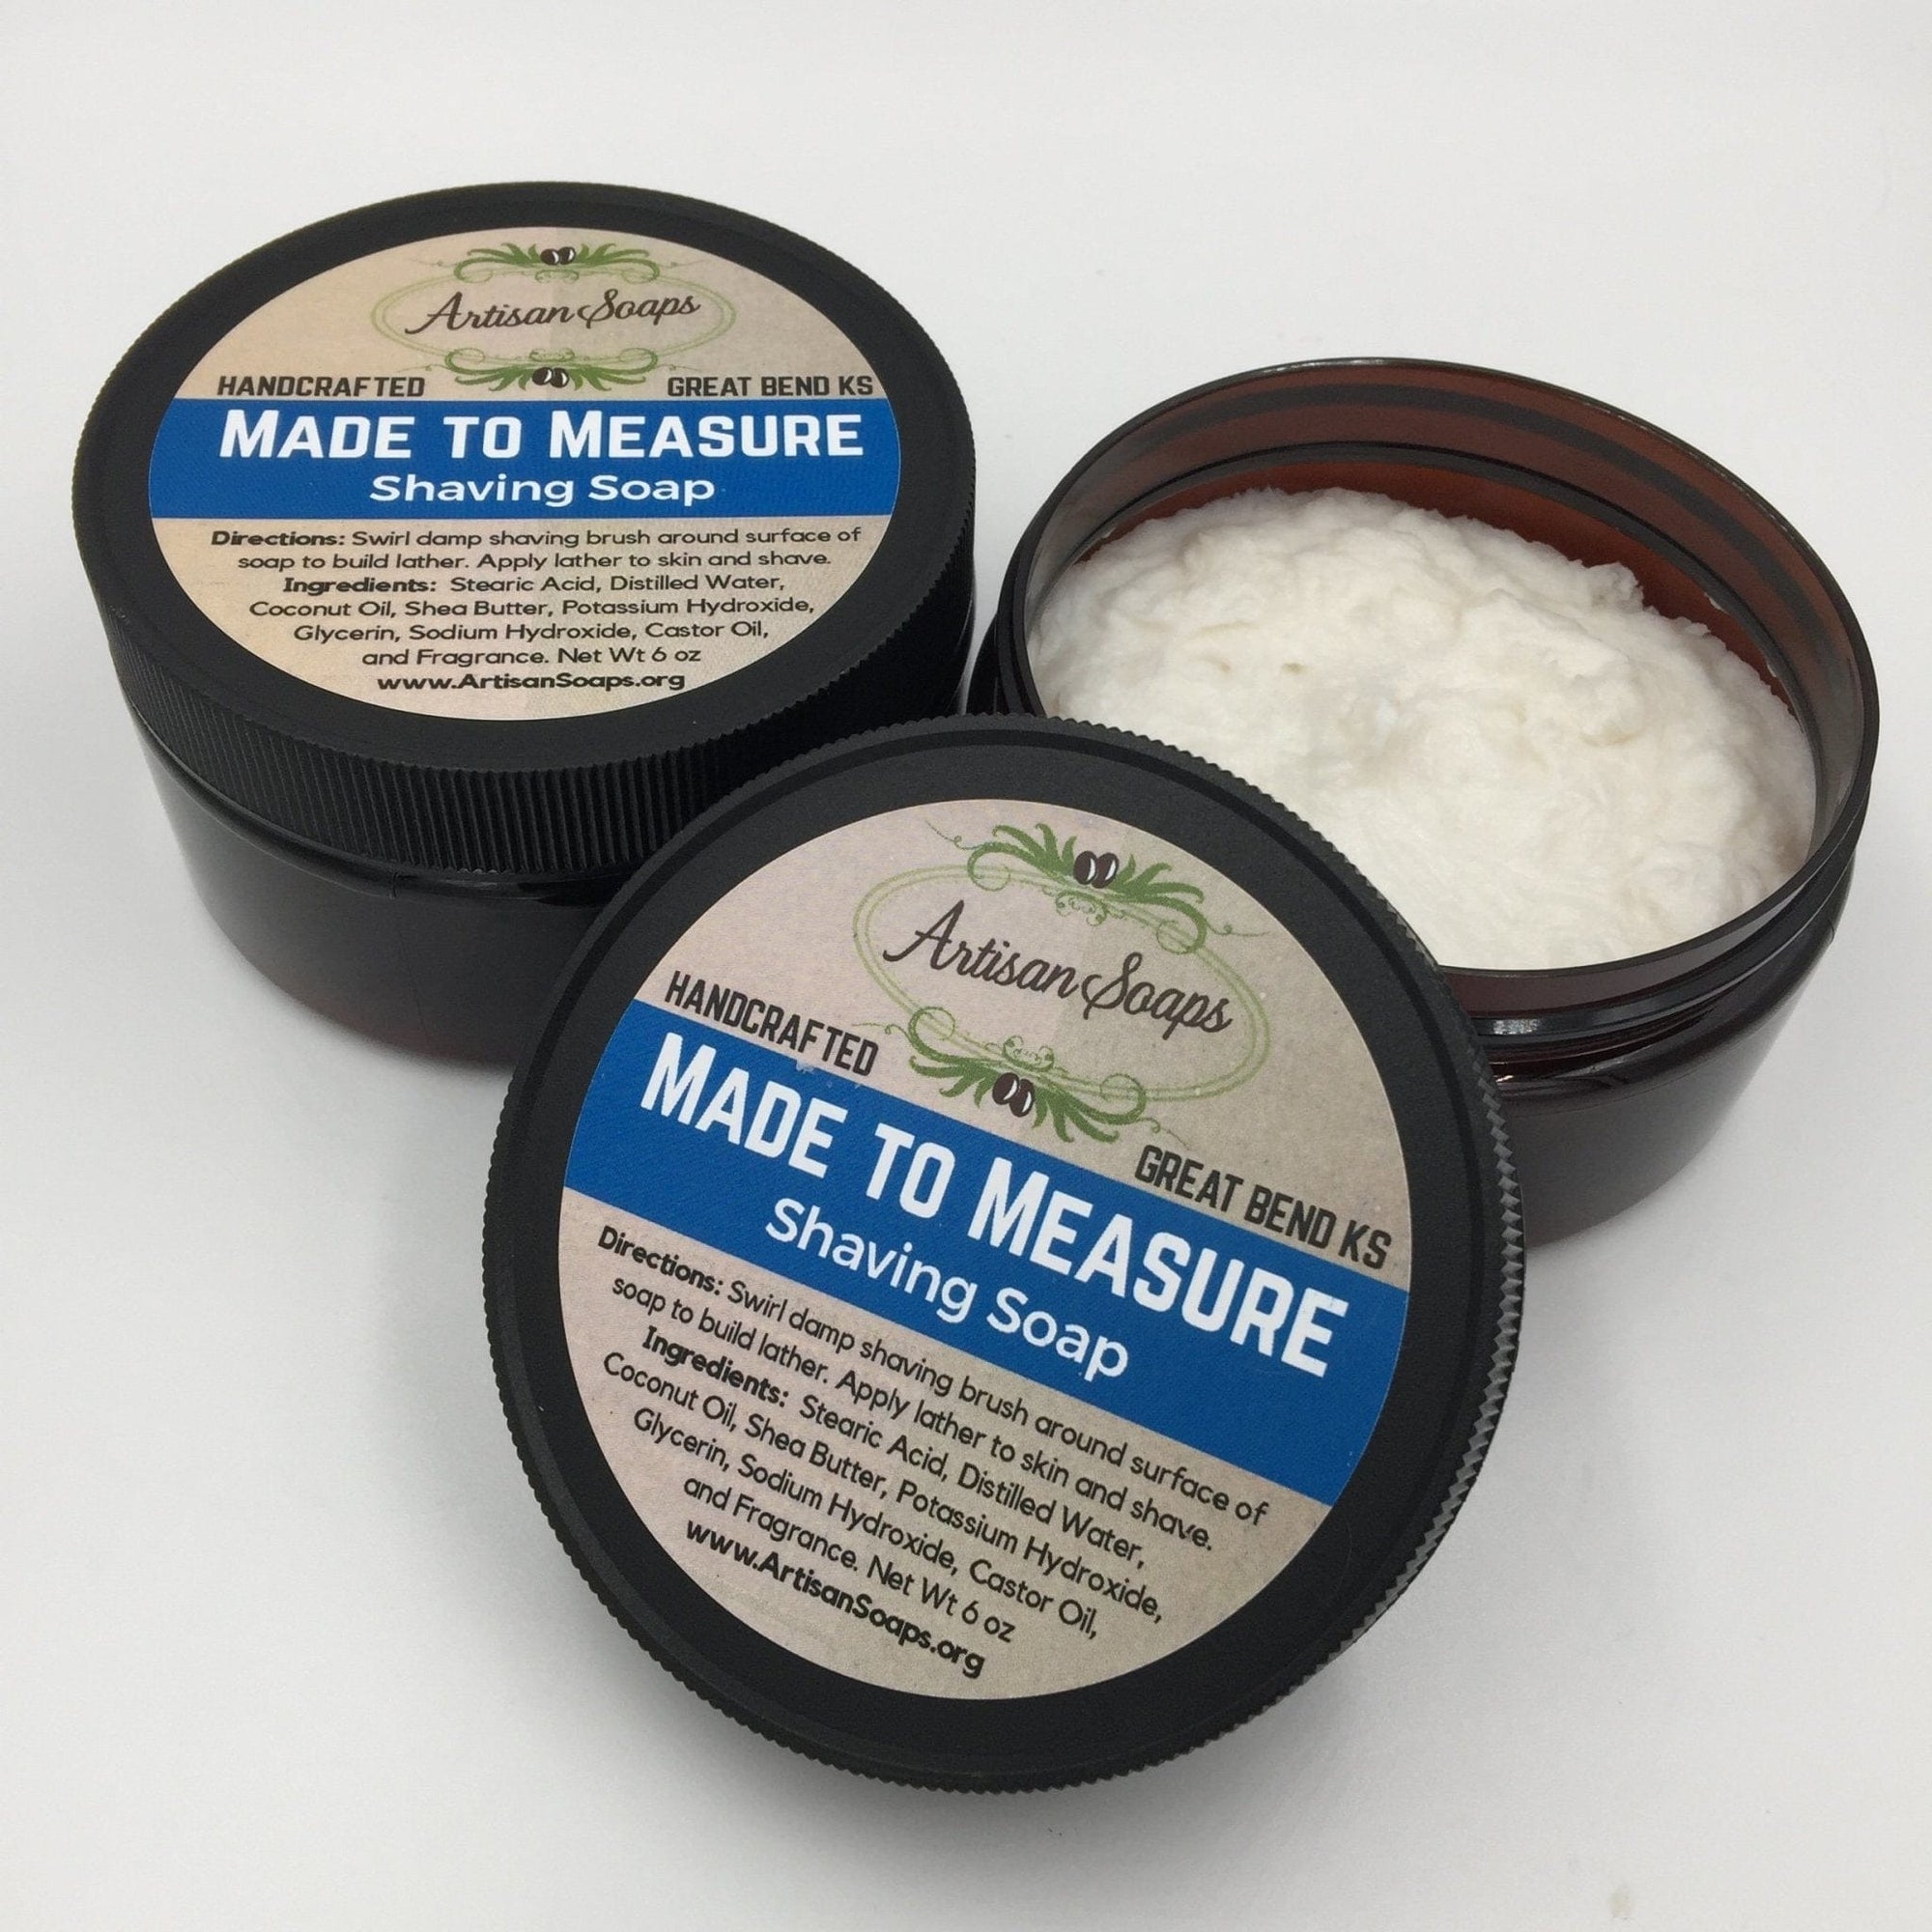 Made to Measure Shaving Soap - Artisan Soaps